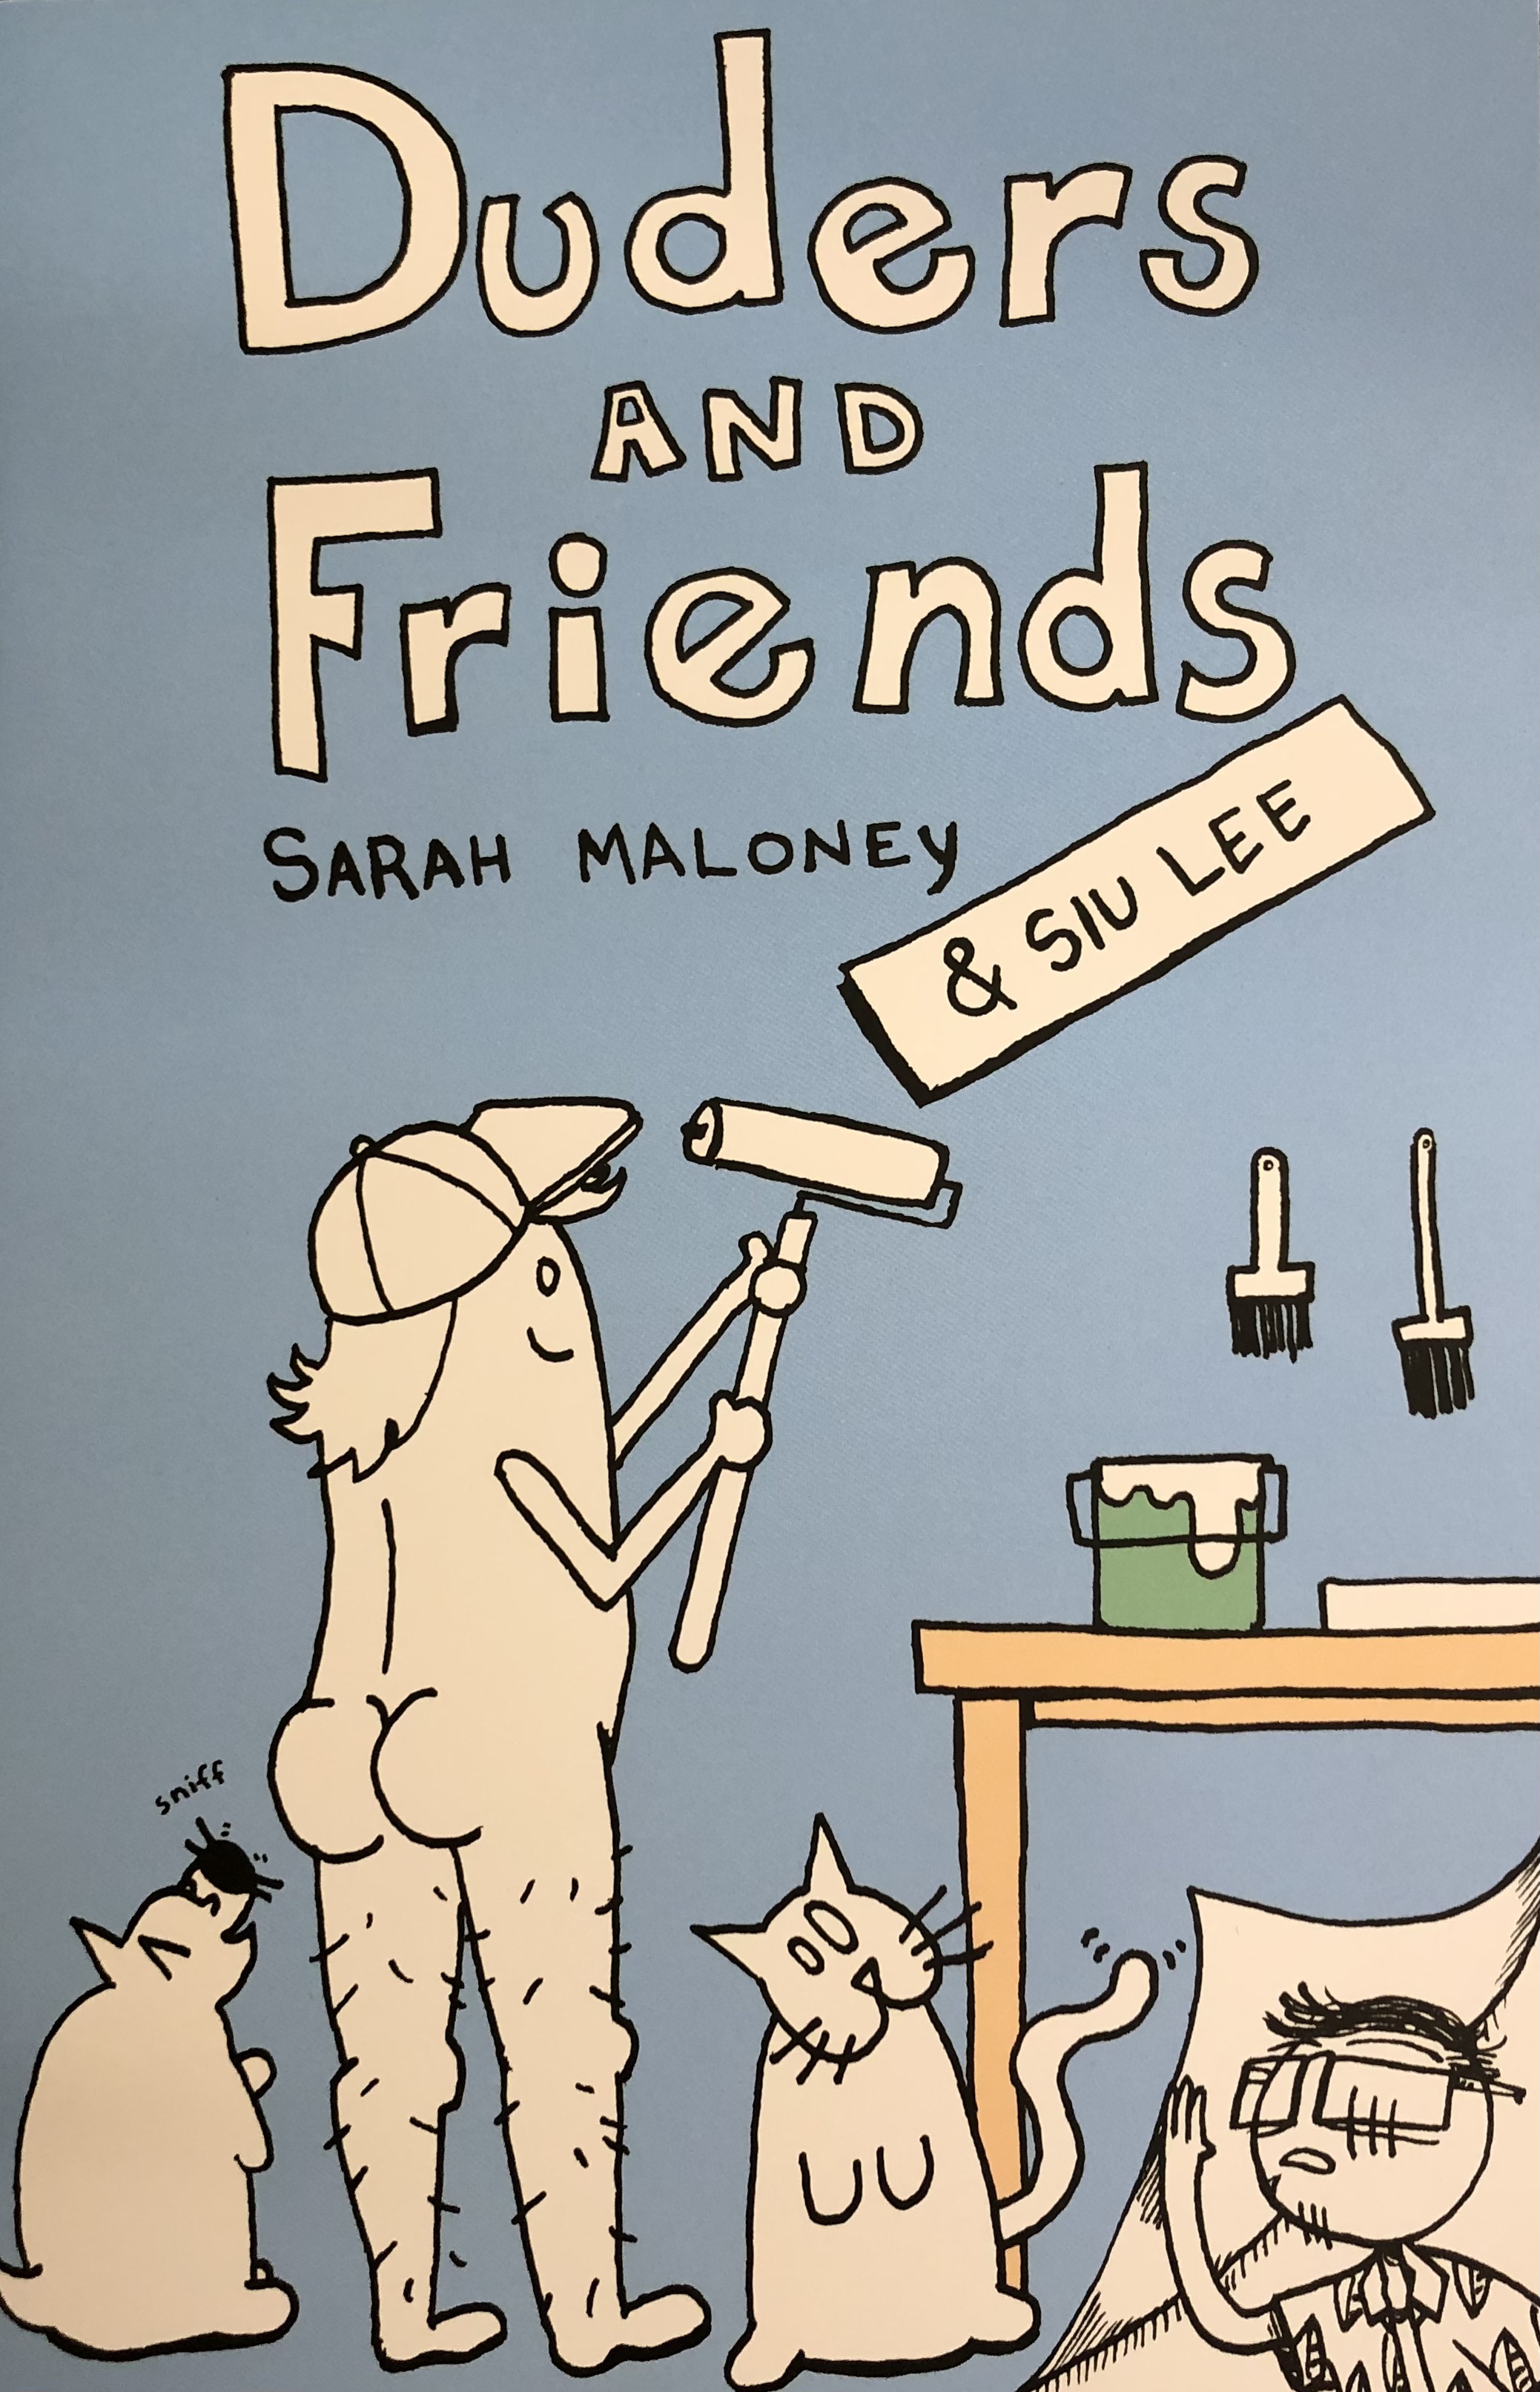 Duders And Friends By Sarah Maloney & Siu Lee